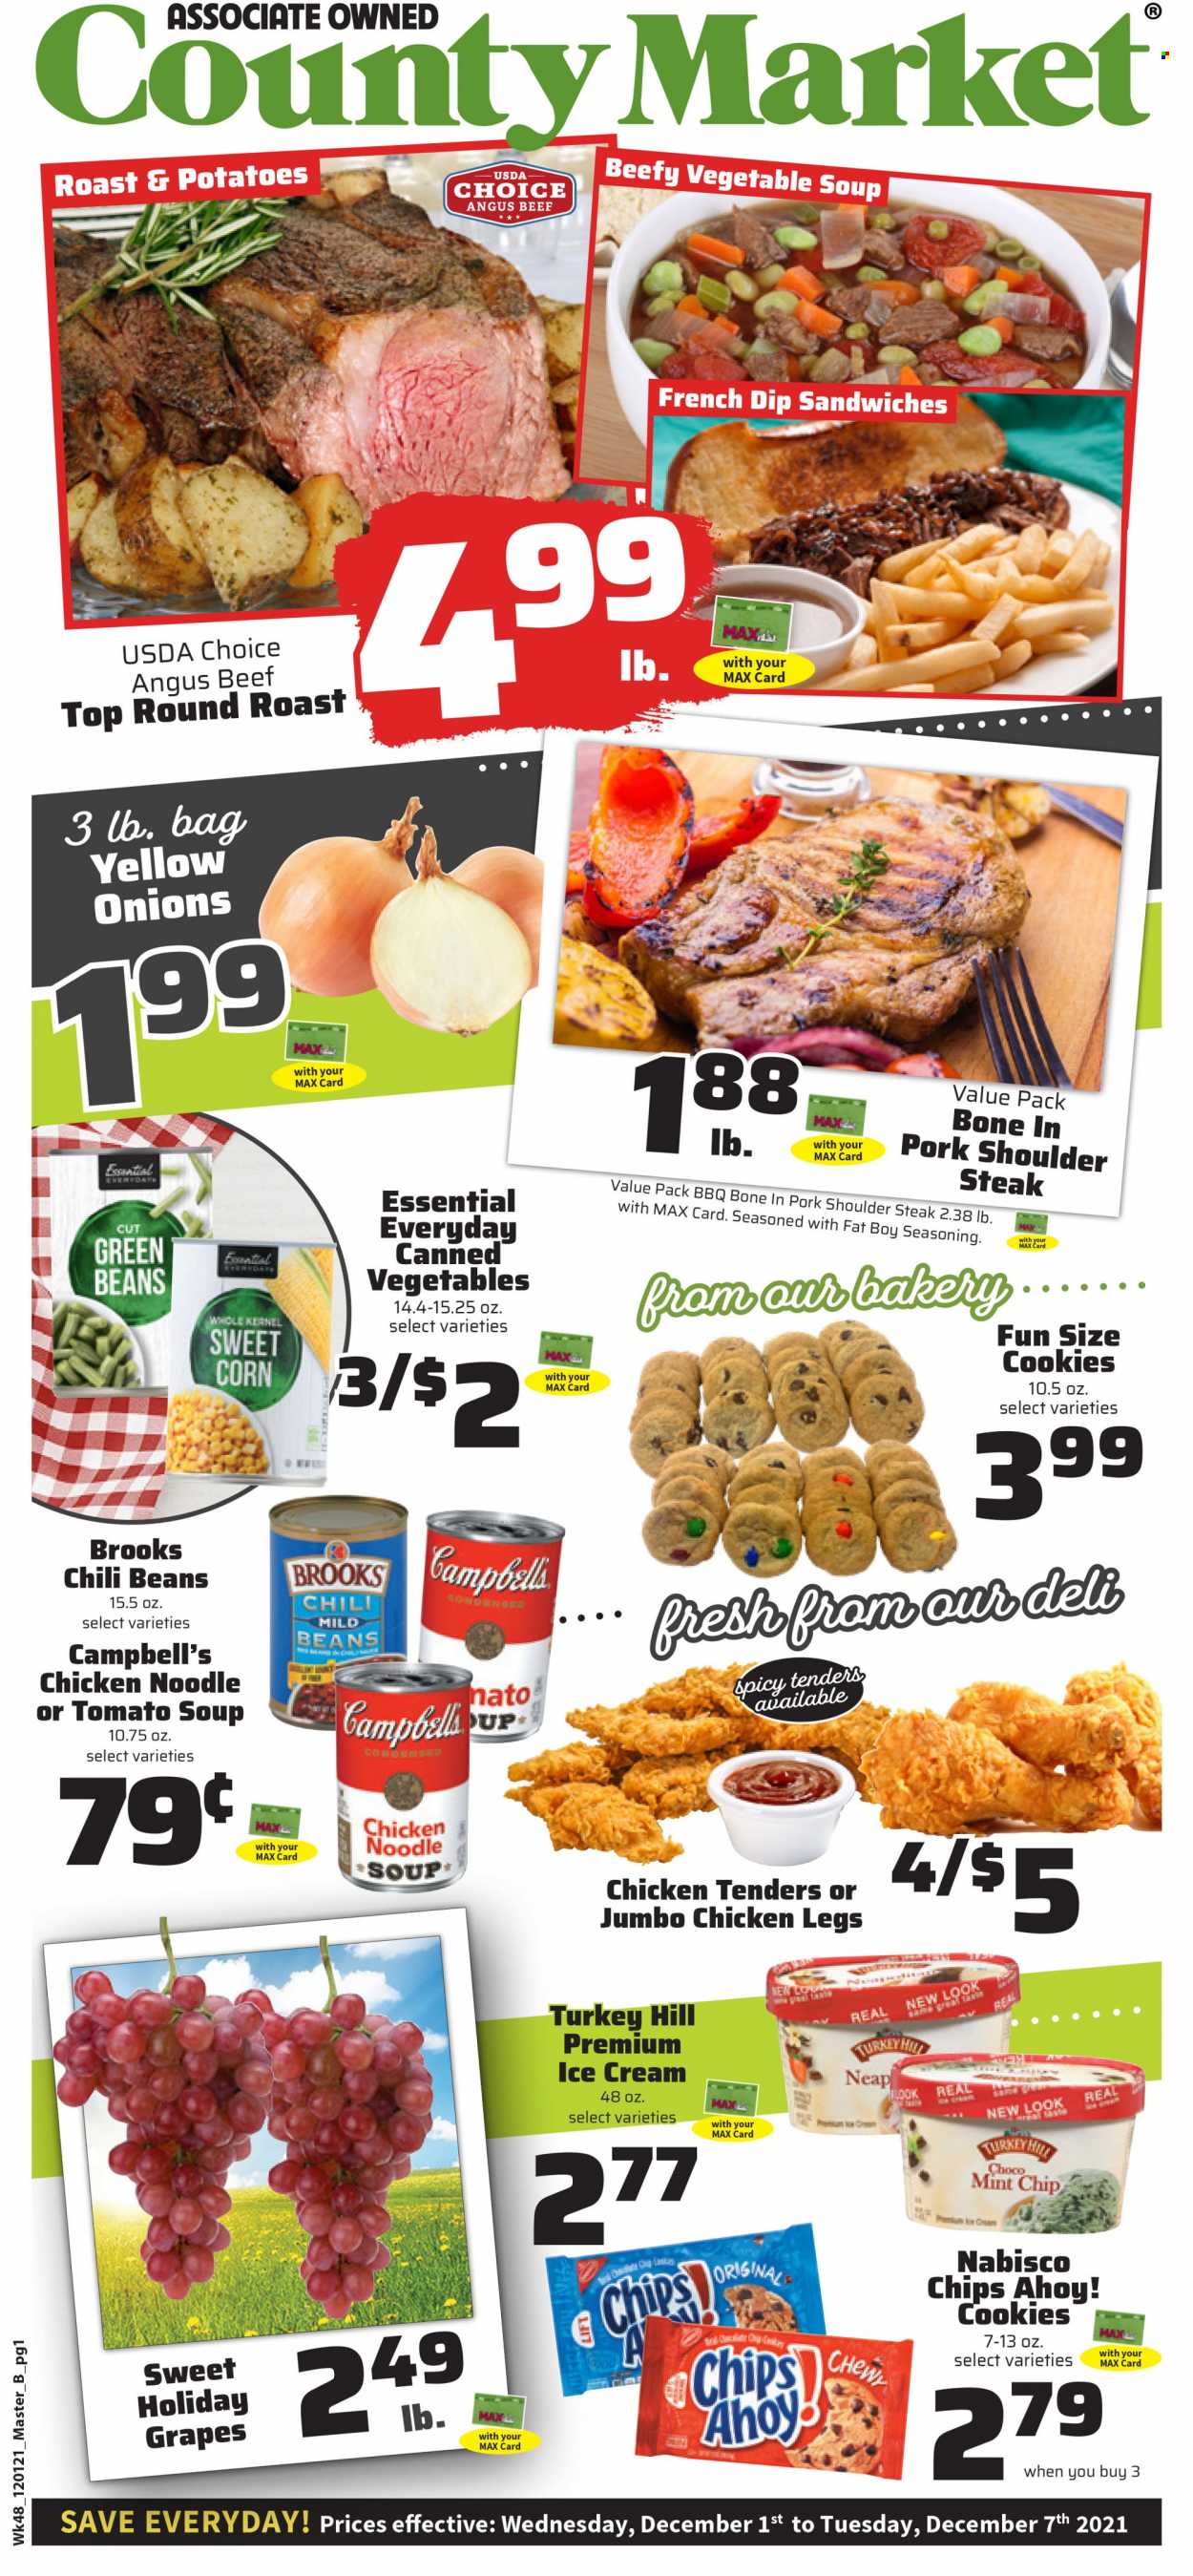 thumbnail - County Market Flyer - 12/01/2021 - 12/07/2021 - Sales products - beans, corn, green beans, potatoes, sweet corn, grapes, Campbell's, tomato soup, vegetable soup, chicken tenders, sandwich, soup, noodles cup, noodles, dip, ice cream, cookies, Chips Ahoy!, chips, chili beans, canned vegetables, spice, chicken legs, beef meat, steak, round roast, pork meat, pork shoulder. Page 1.